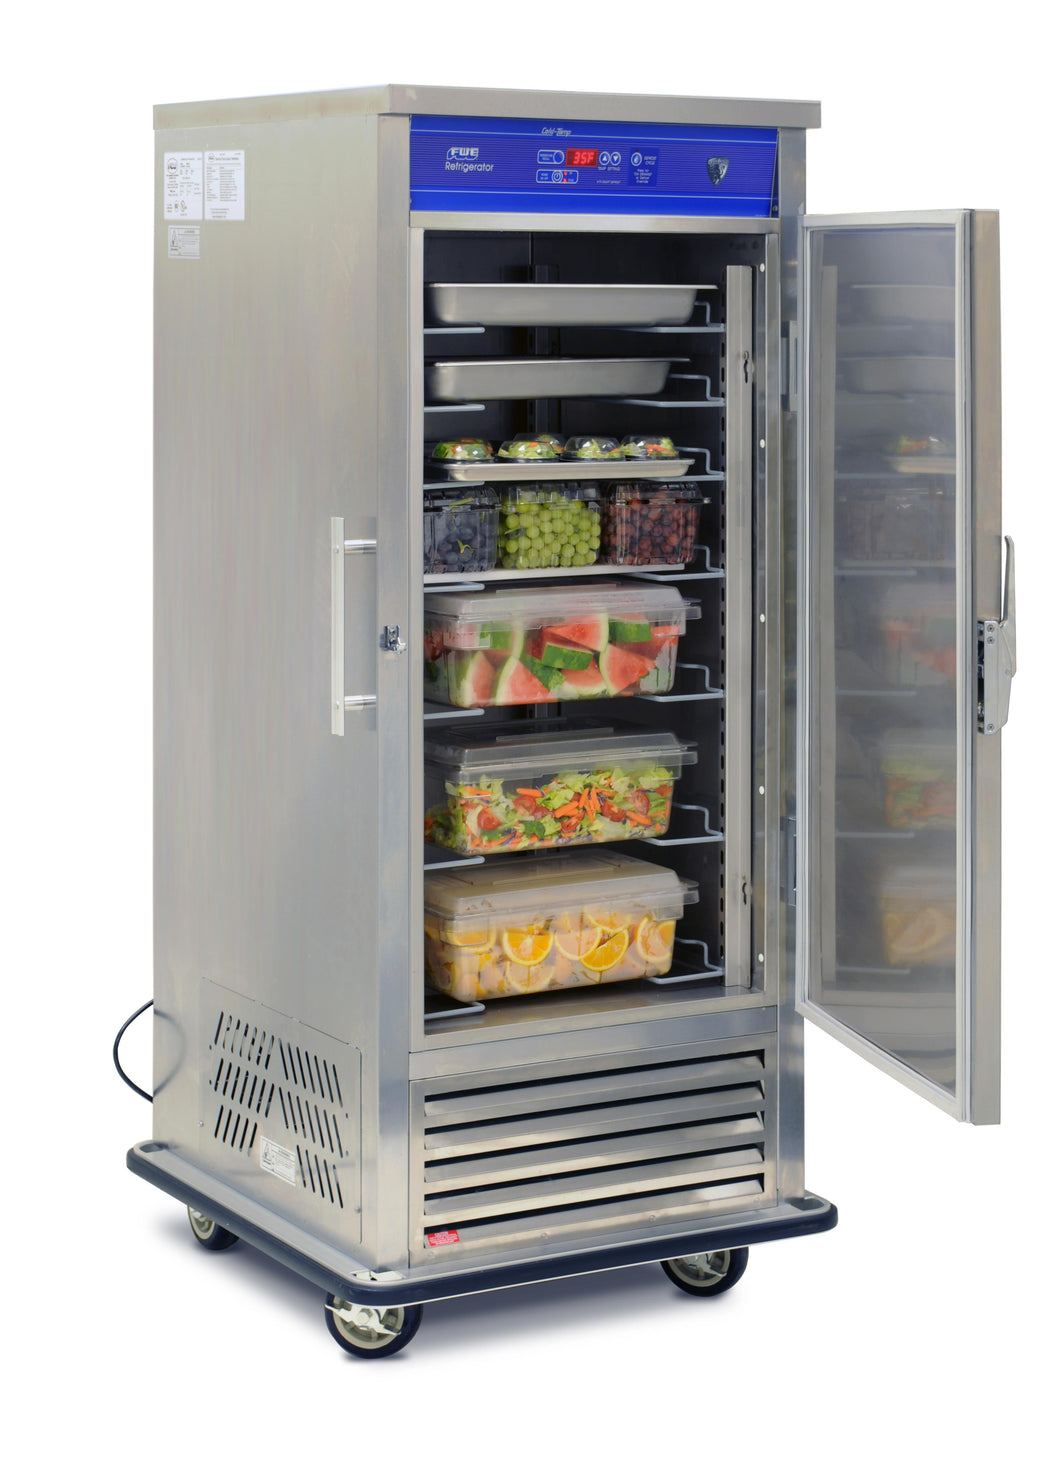 Clearance Centre - FWE - Mobile Refrigerator - URS-10